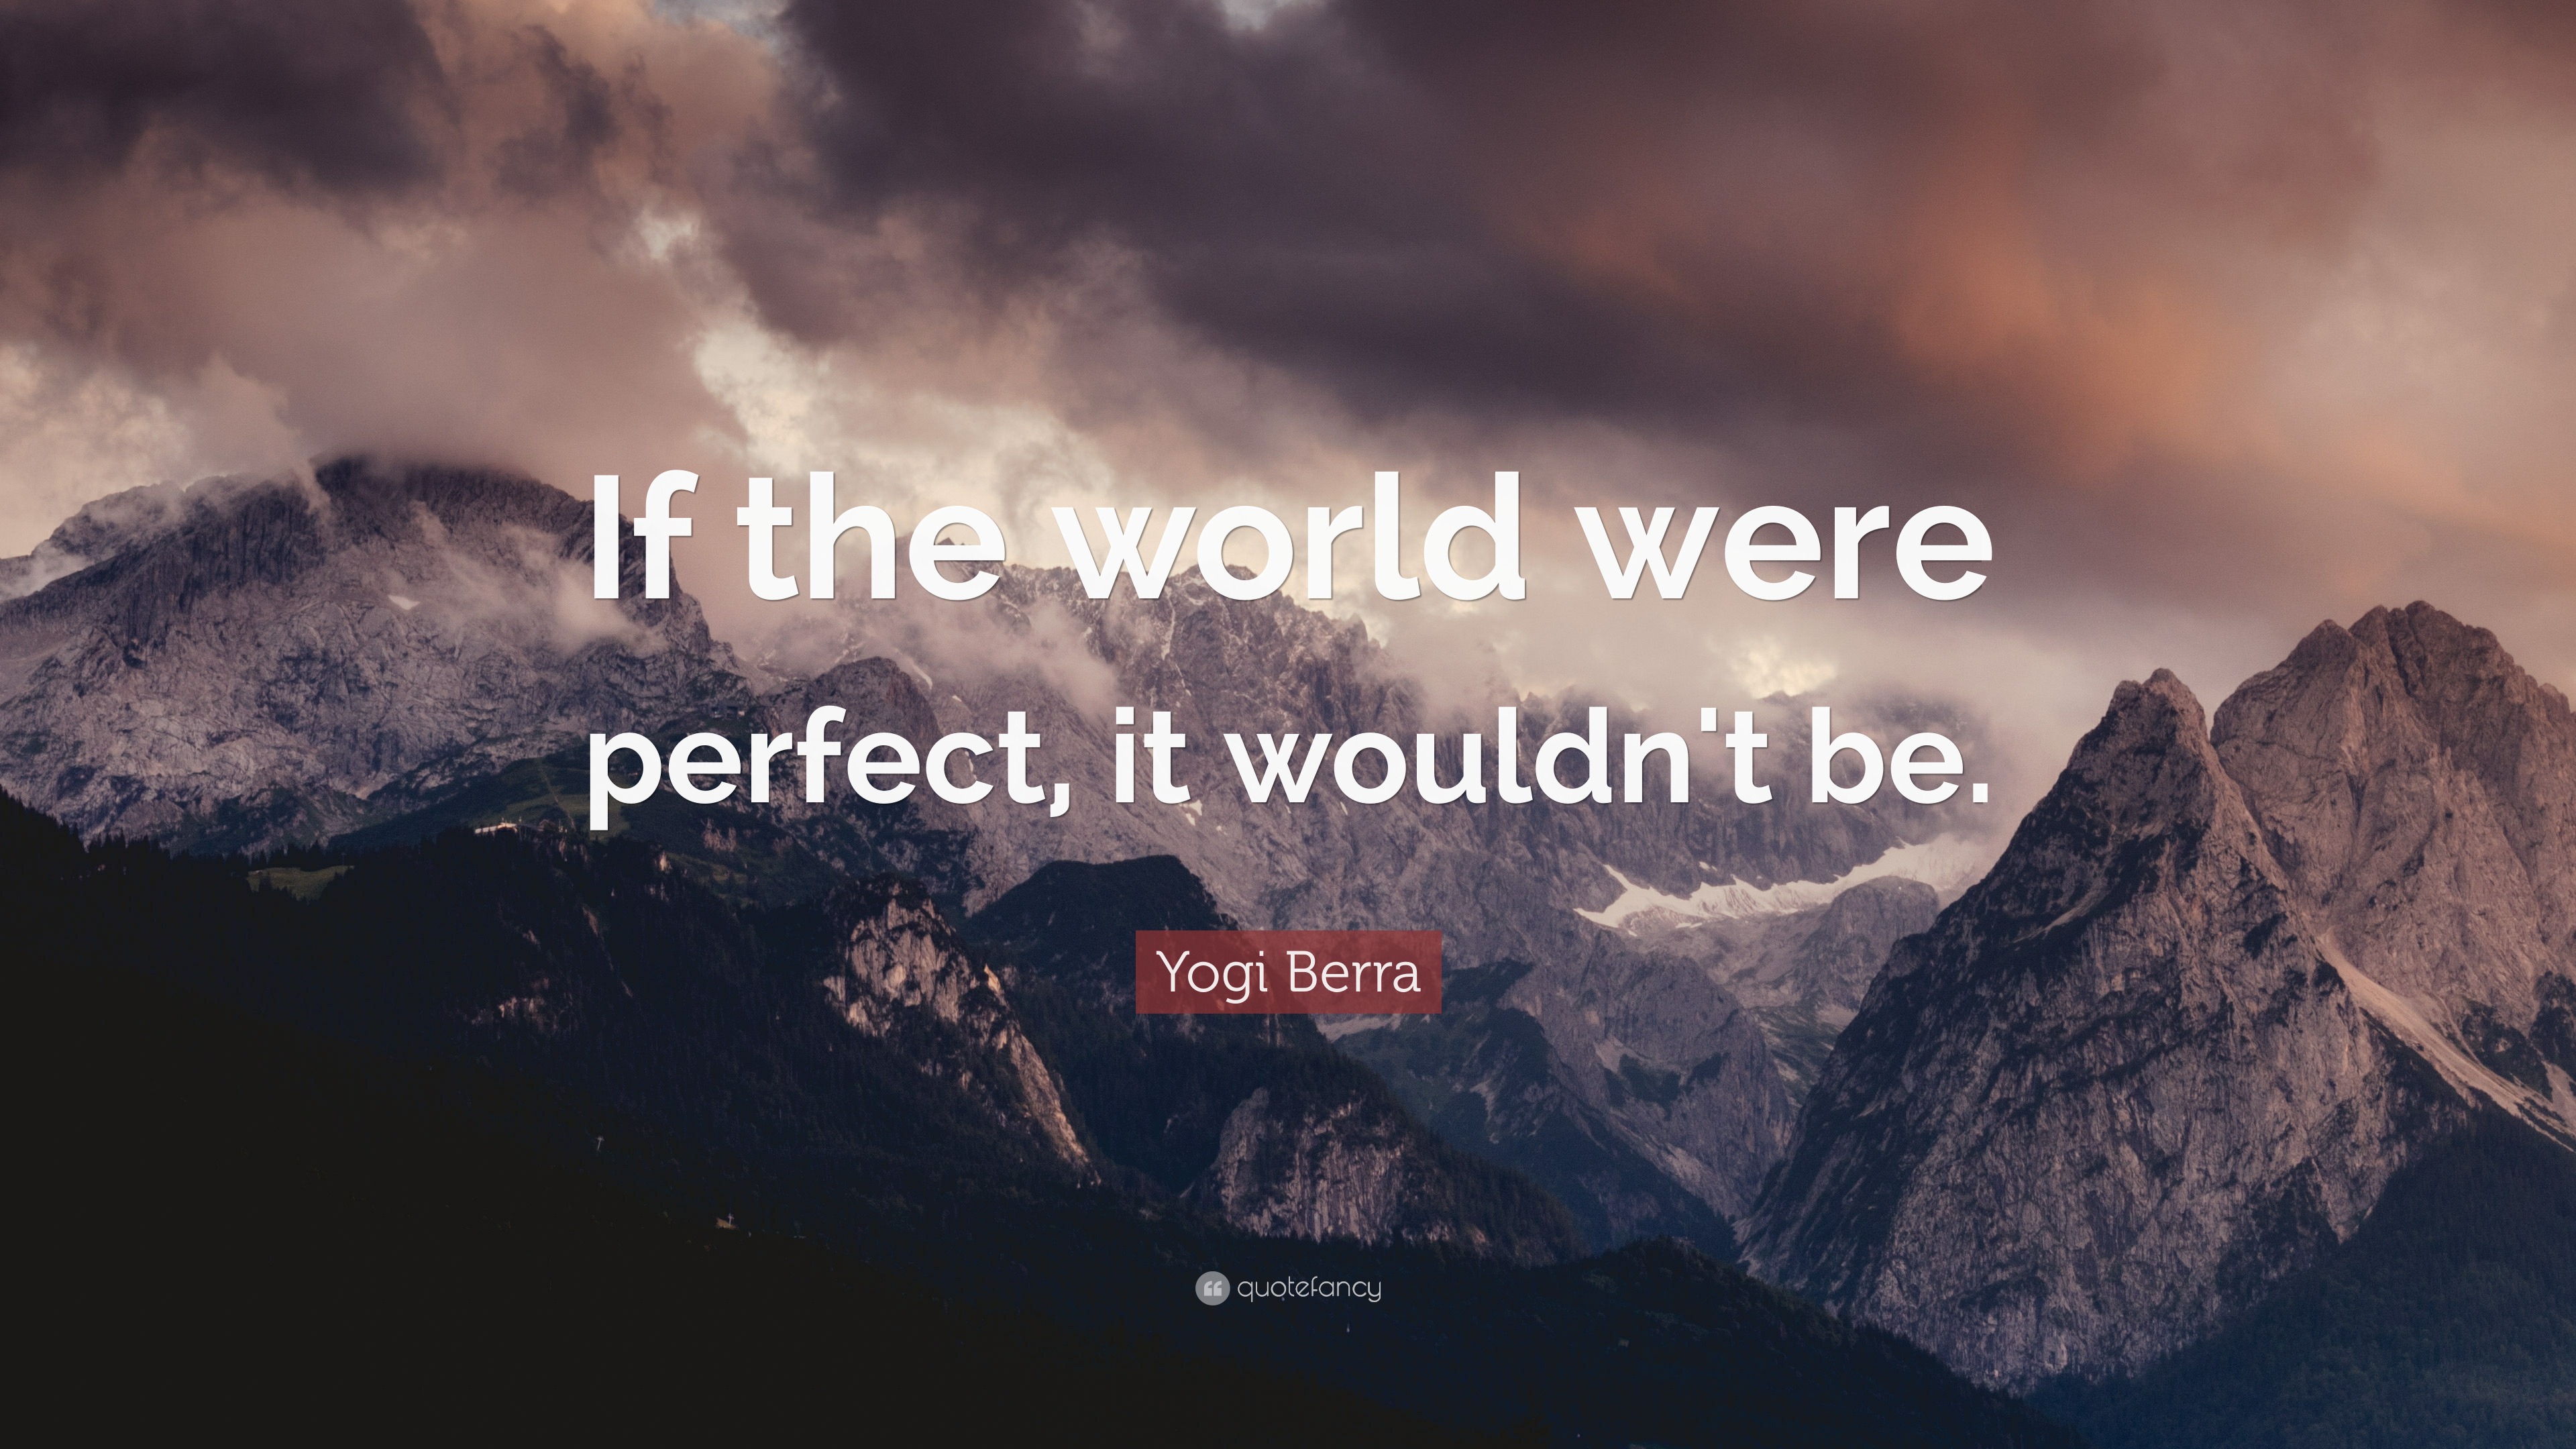 Yogi Berra - If the world were perfect, it wouldn't be.